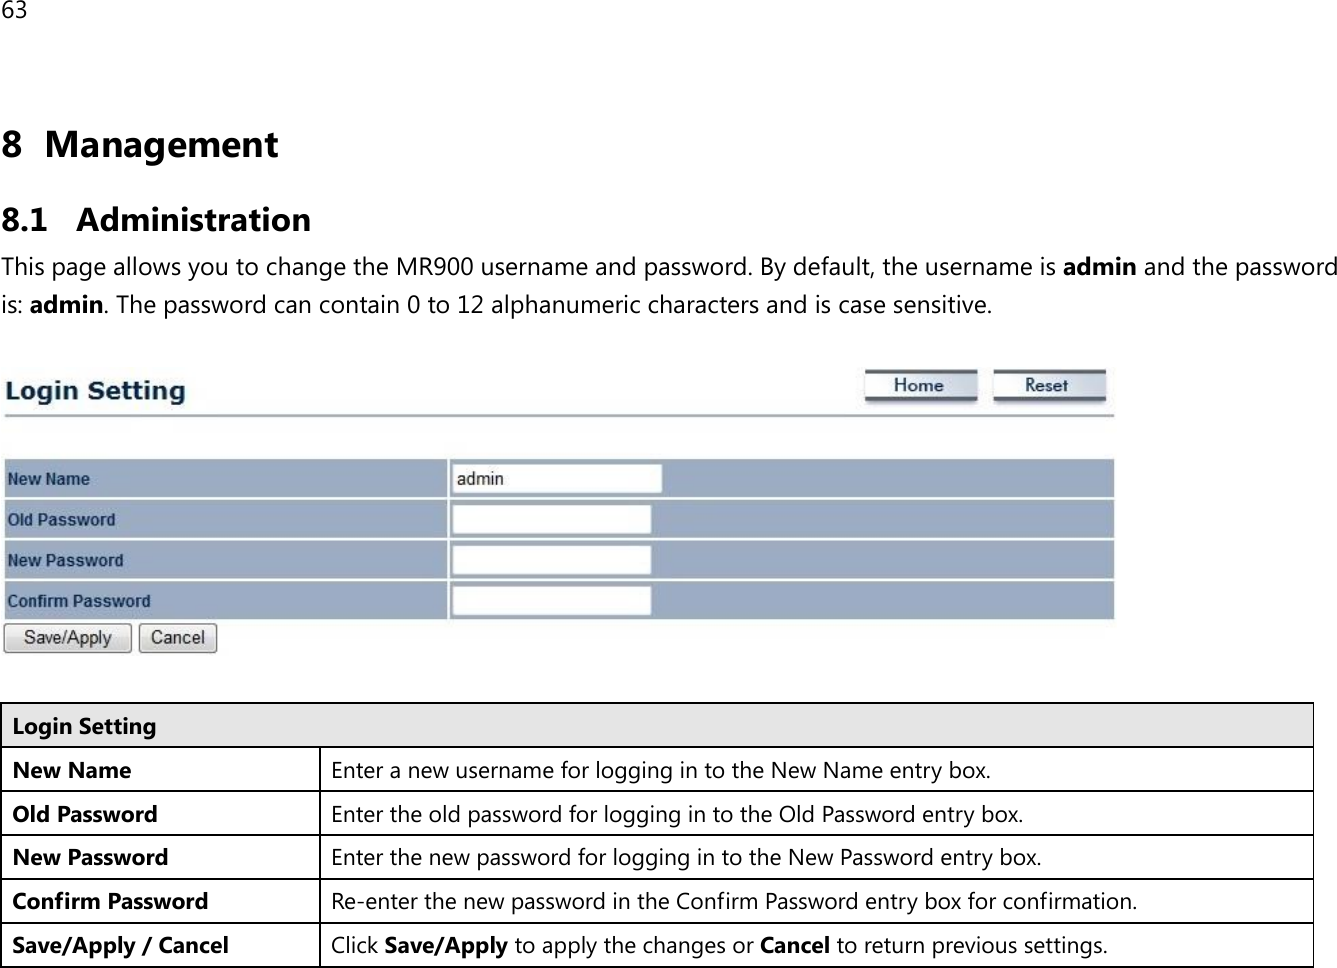 63 8 Management  8.1 Administration This page allows you to change the MR900 username and password. By default, the username is admin and the password is: admin. The password can contain 0 to 12 alphanumeric characters and is case sensitive.    Login Setting New Name Enter a new username for logging in to the New Name entry box. Old Password Enter the old password for logging in to the Old Password entry box. New Password Enter the new password for logging in to the New Password entry box. Confirm Password Re-enter the new password in the Confirm Password entry box for confirmation. Save/Apply / Cancel Click Save/Apply to apply the changes or Cancel to return previous settings.  